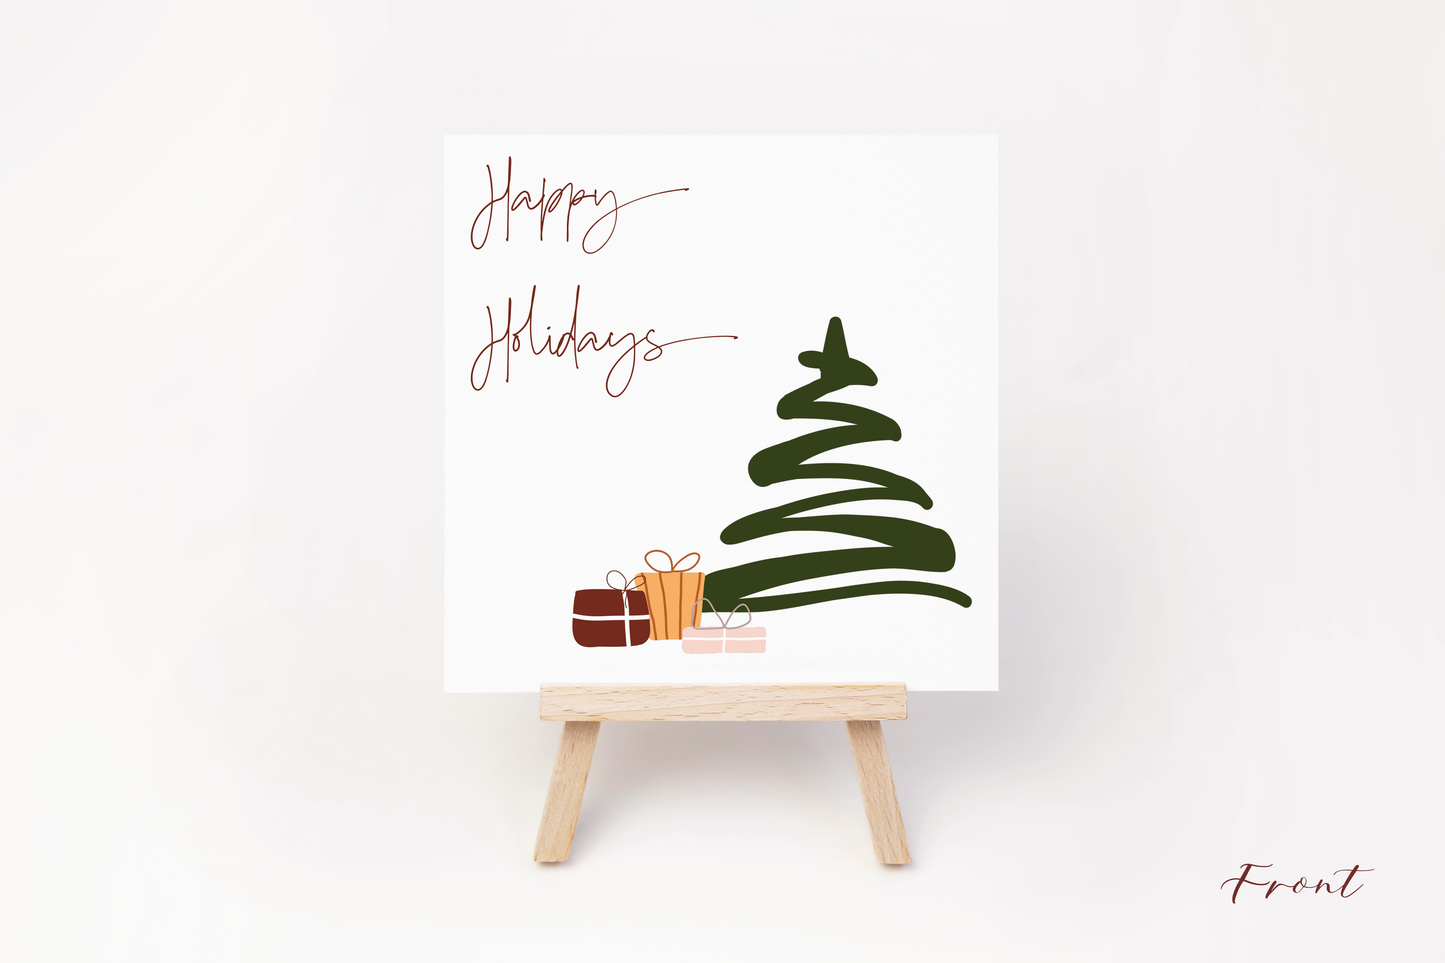 5" x 5" Happy Holidays Card with Photo